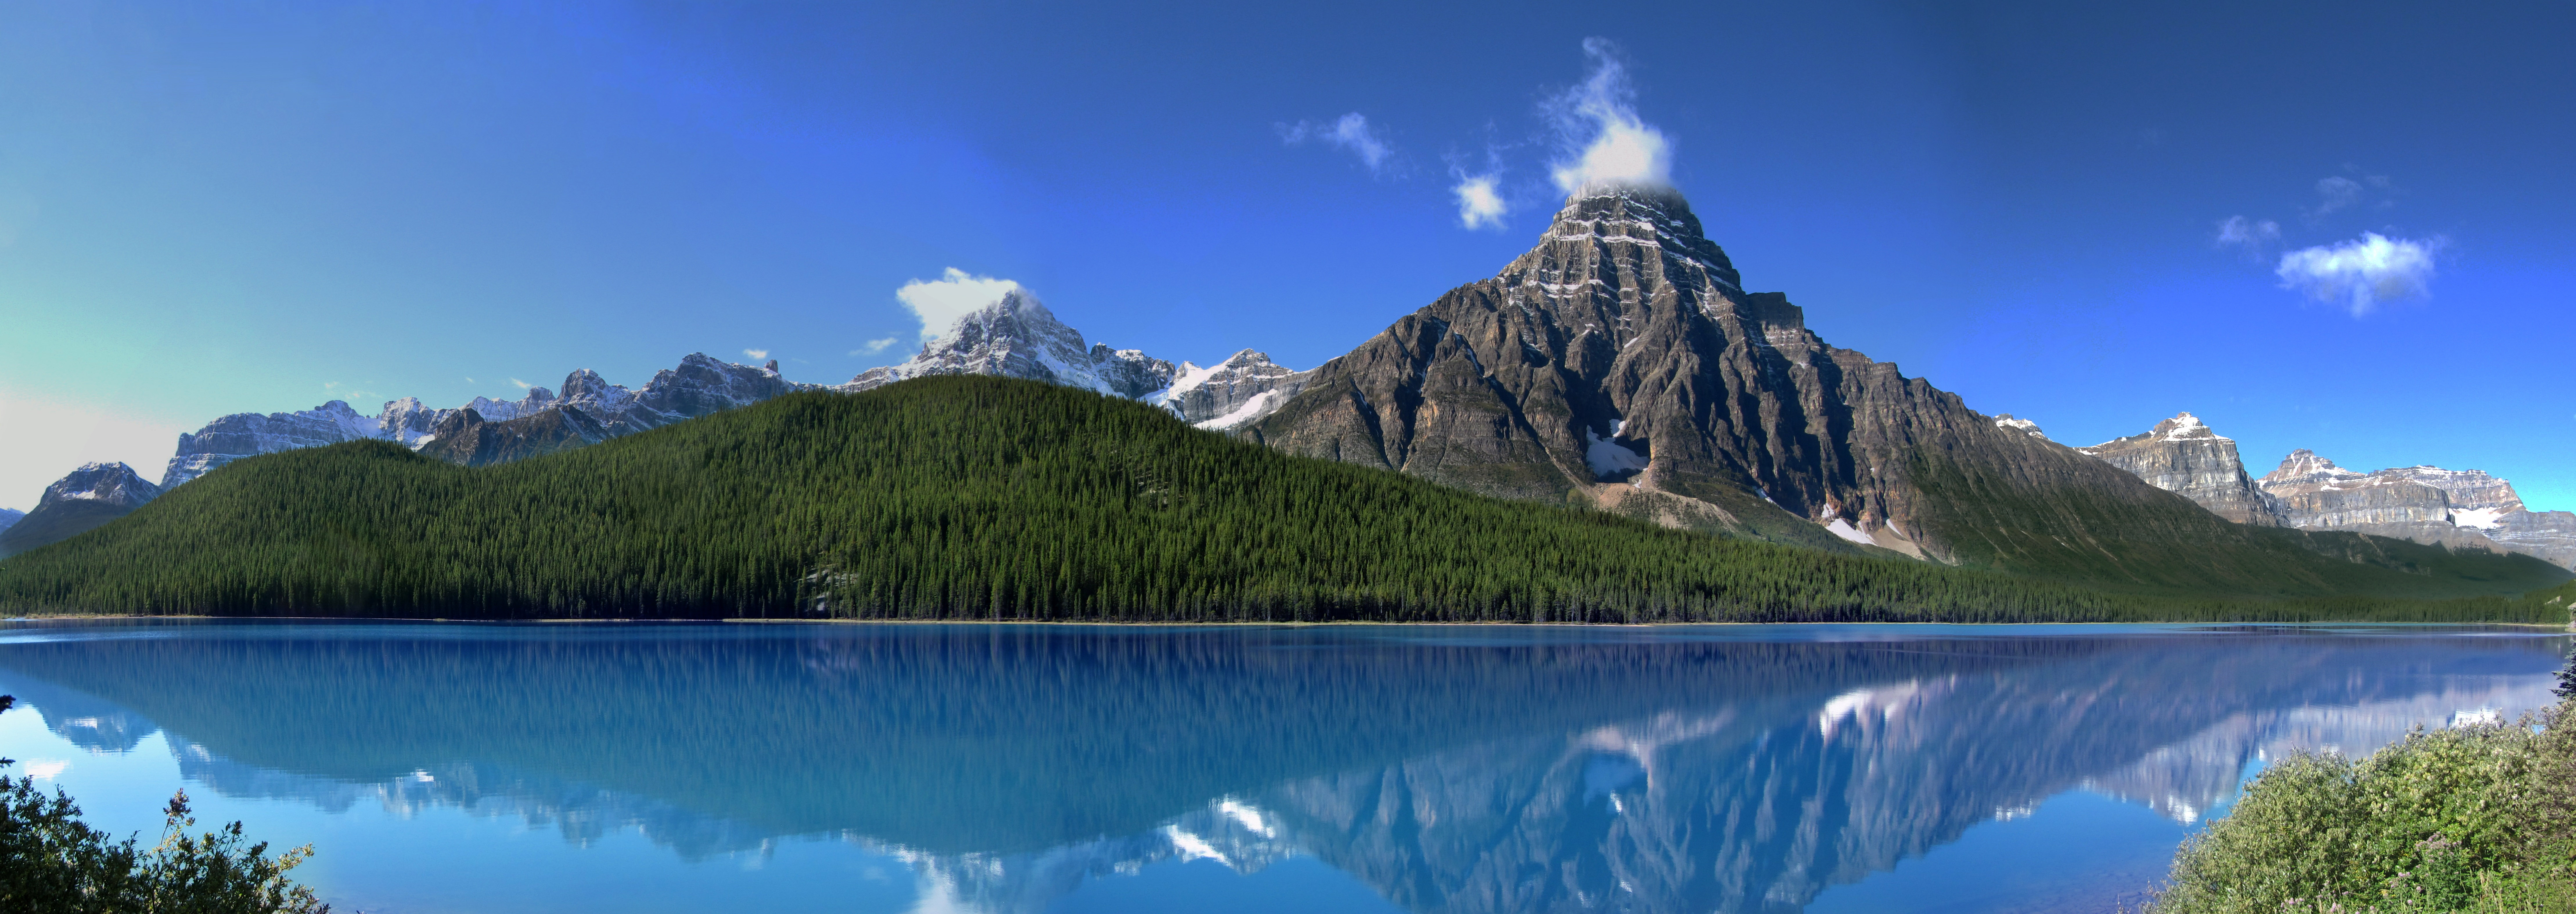 Rocky Mountains of British Columbia landscape in Canada ...
